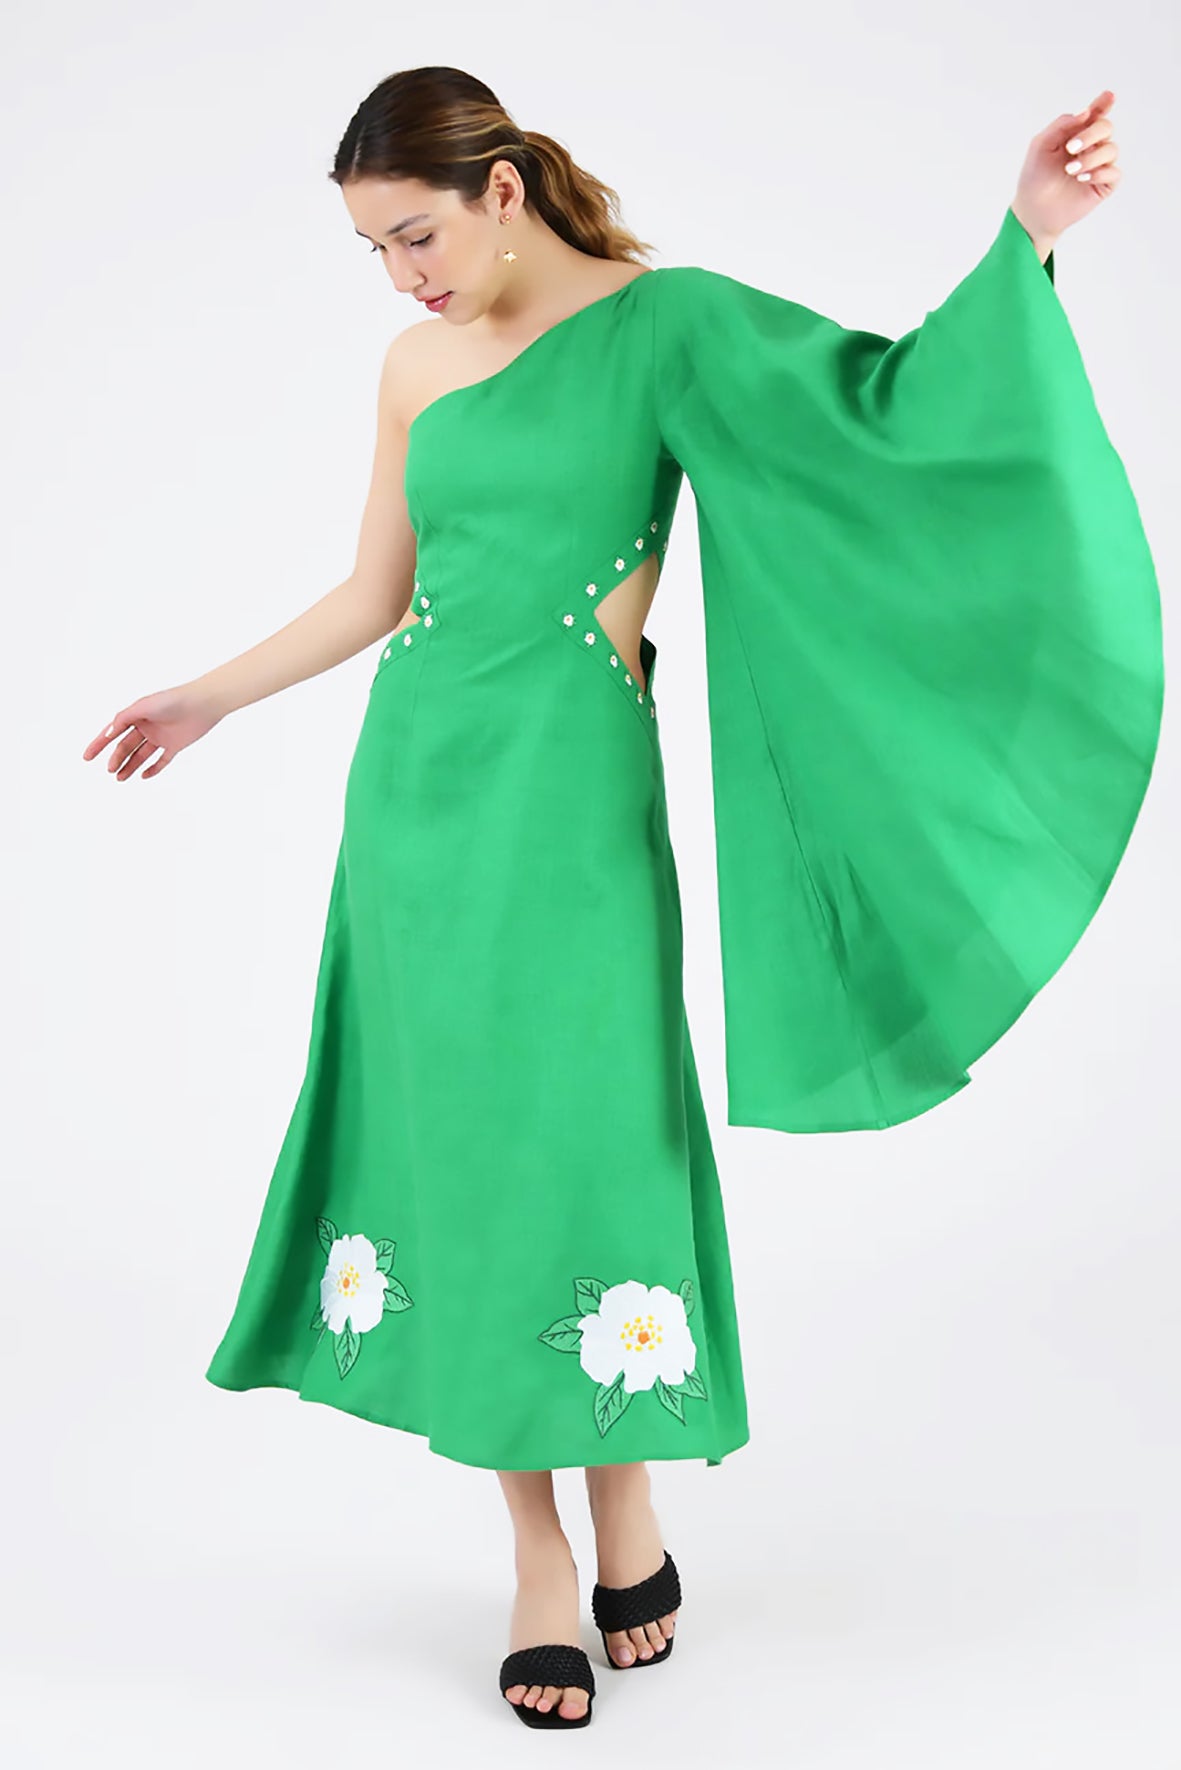 Narma Dress (Wanga Collection) in Kelly Green Showcasing the Dramatic Bell Sleeve